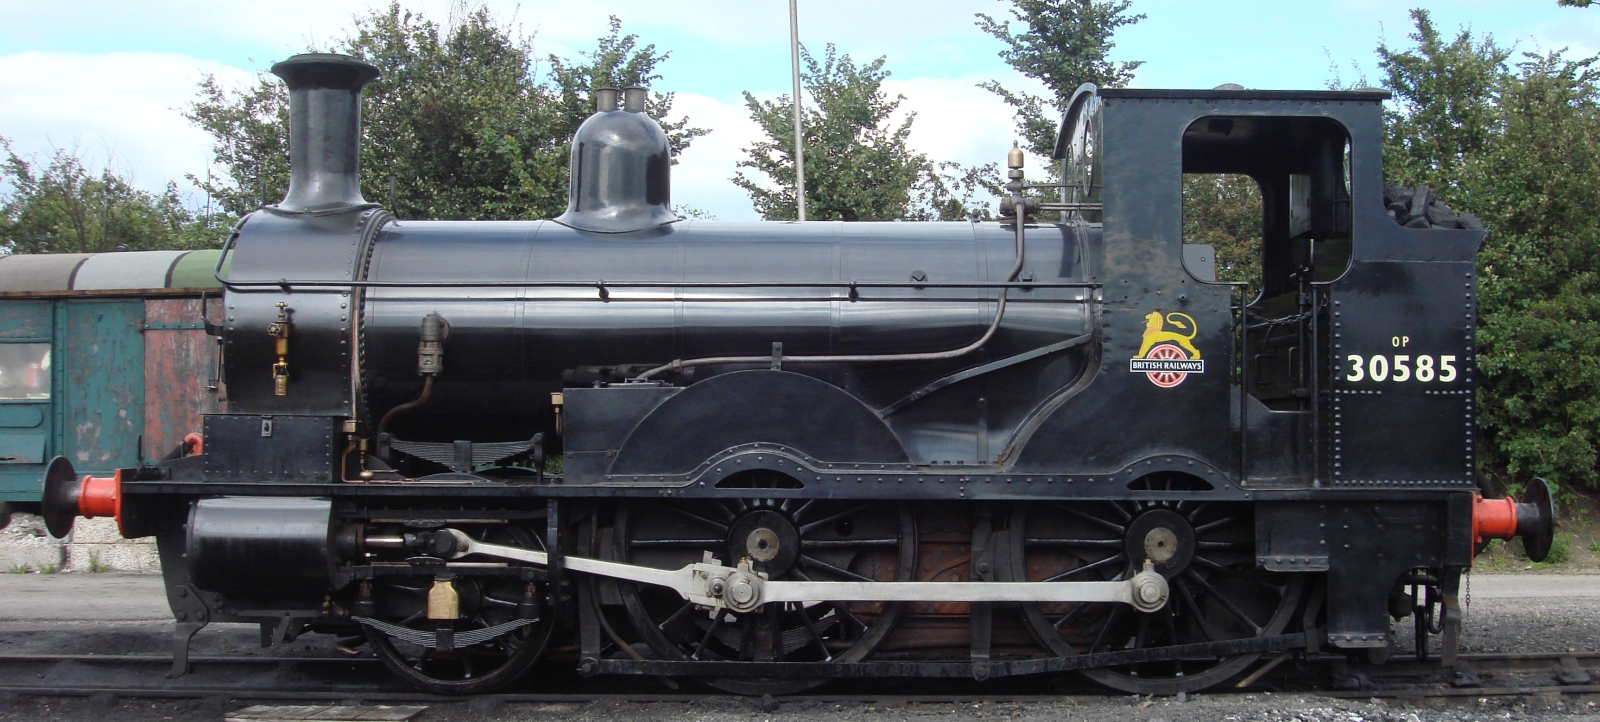 Preserved No. 0314 at Buckinghamshire Railway Centre